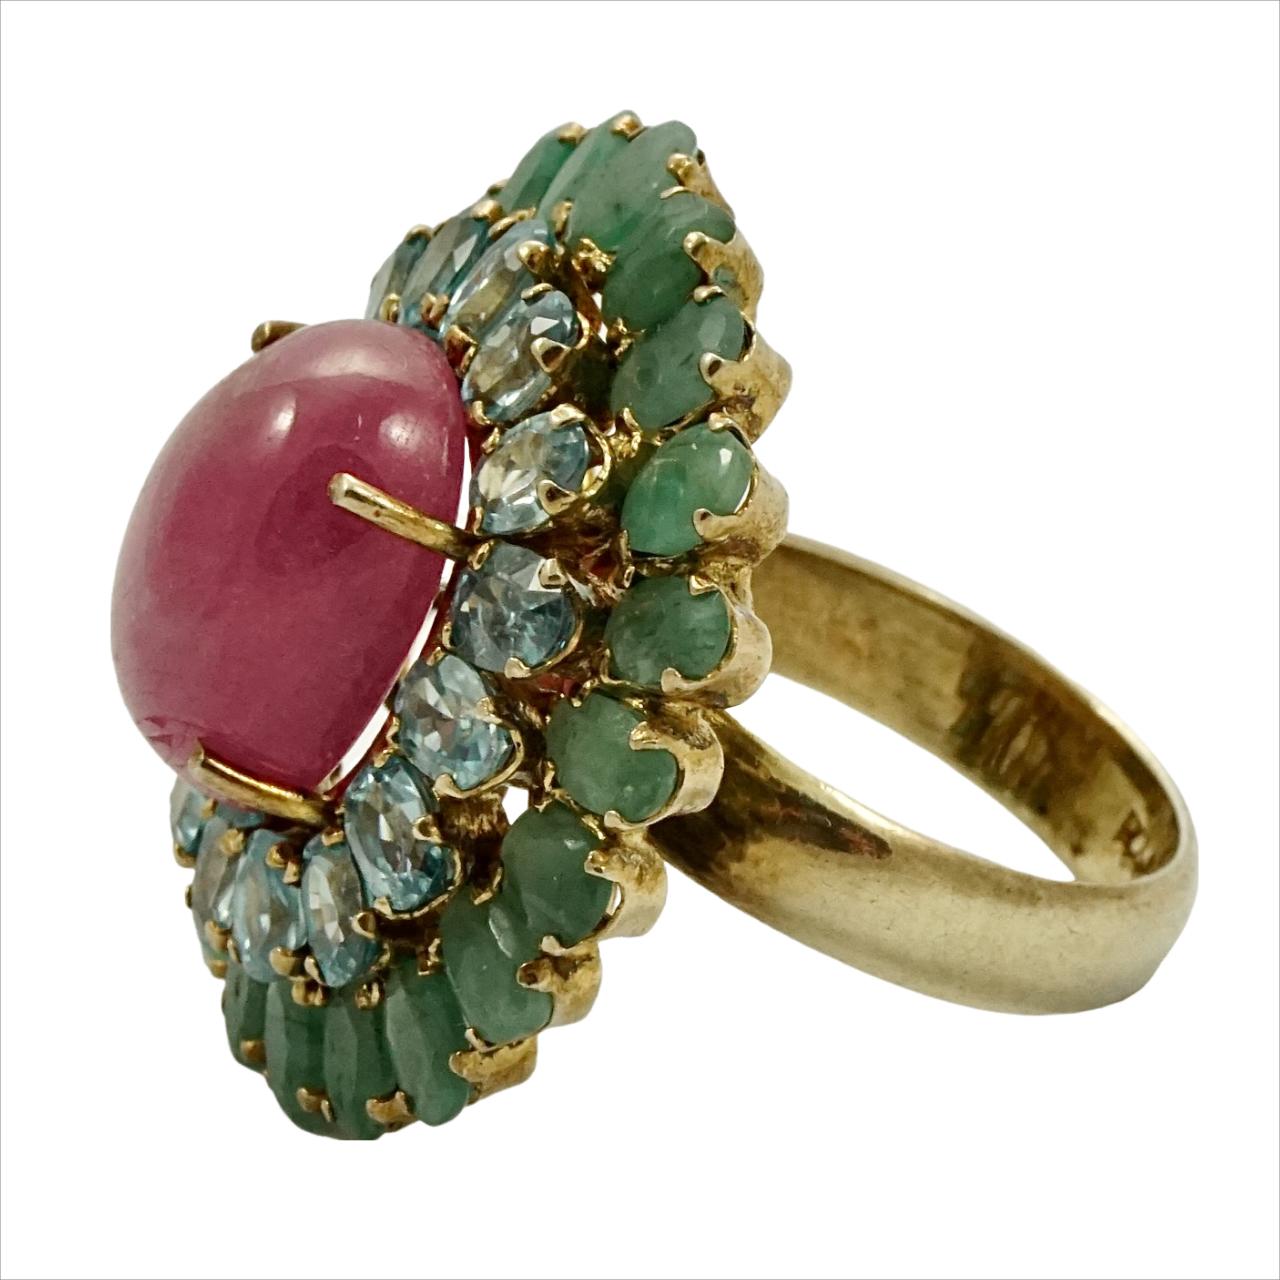 Fabulous gold vermeil on sterling silver ring, featuring a centre ruby surrounded with blue topaz and emeralds gemstones. Ring size UK P 1/2, US 7 3/4, inside diameter 1.9 cm / .74 inch, and measuring length 3.1 cm / 1.2 inches by 2.9 cm / 1.1